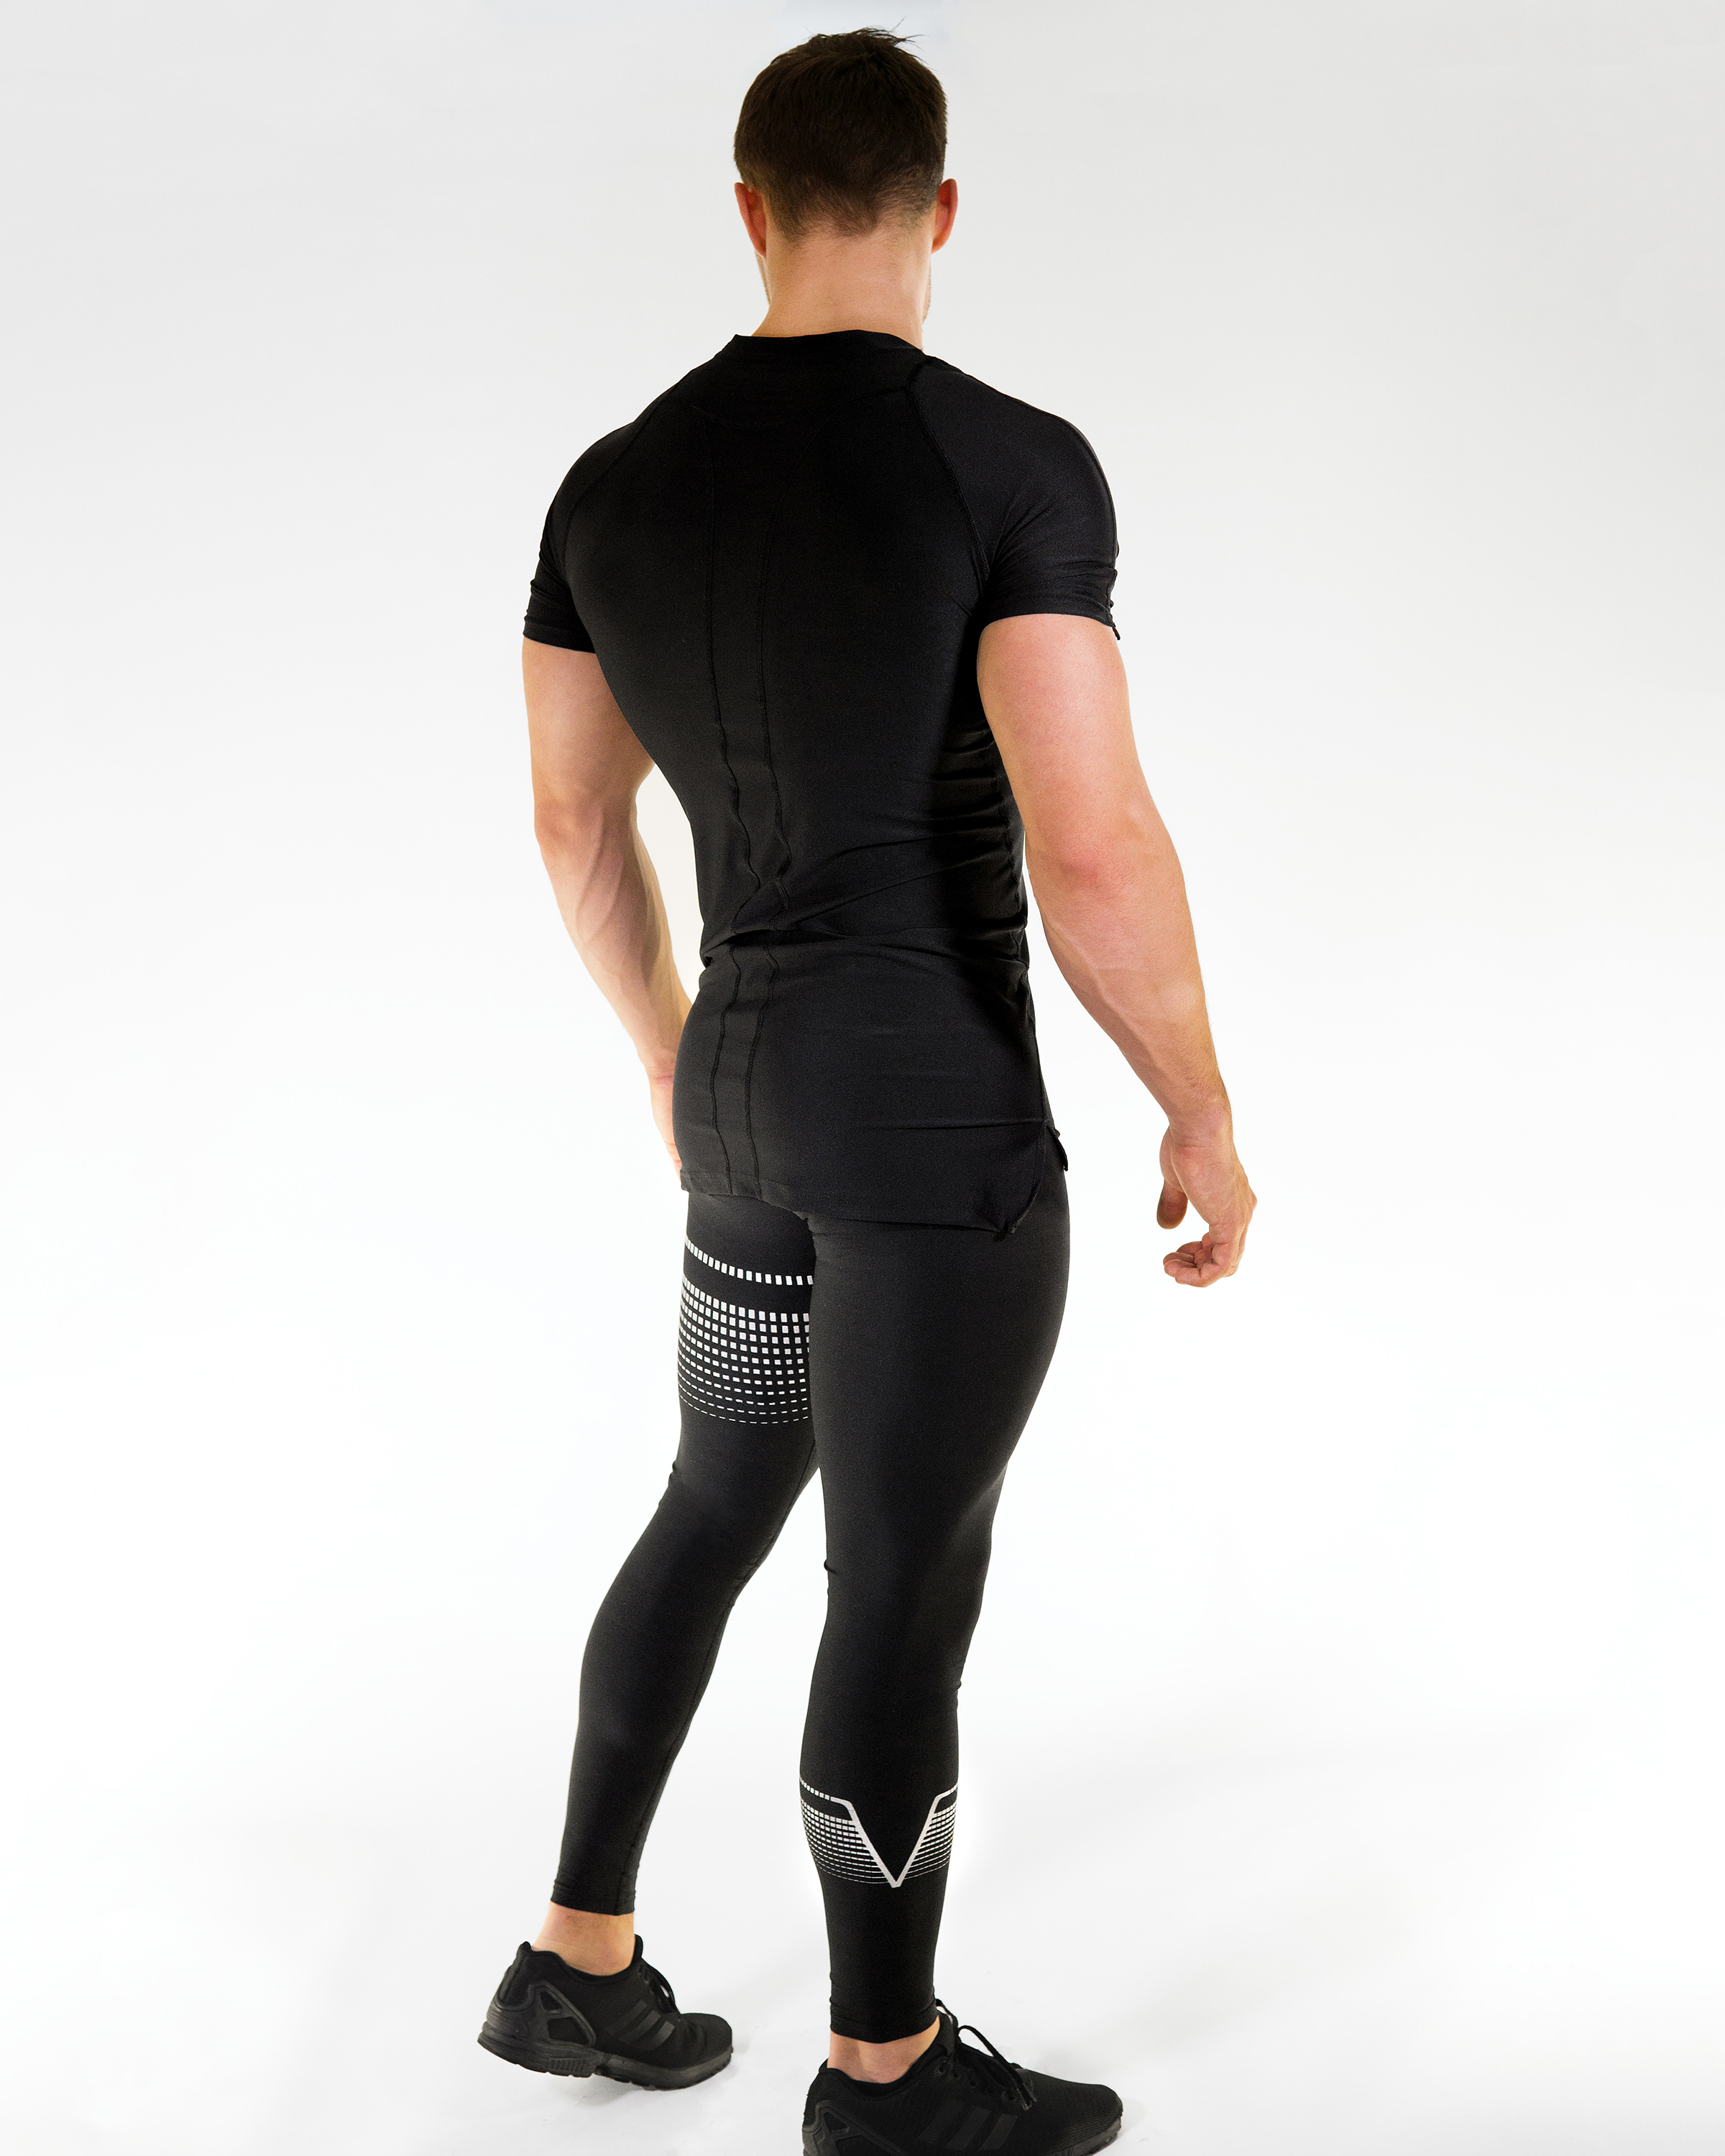 GAVELO Titan Black Compression Pants - Gavelo Official Store